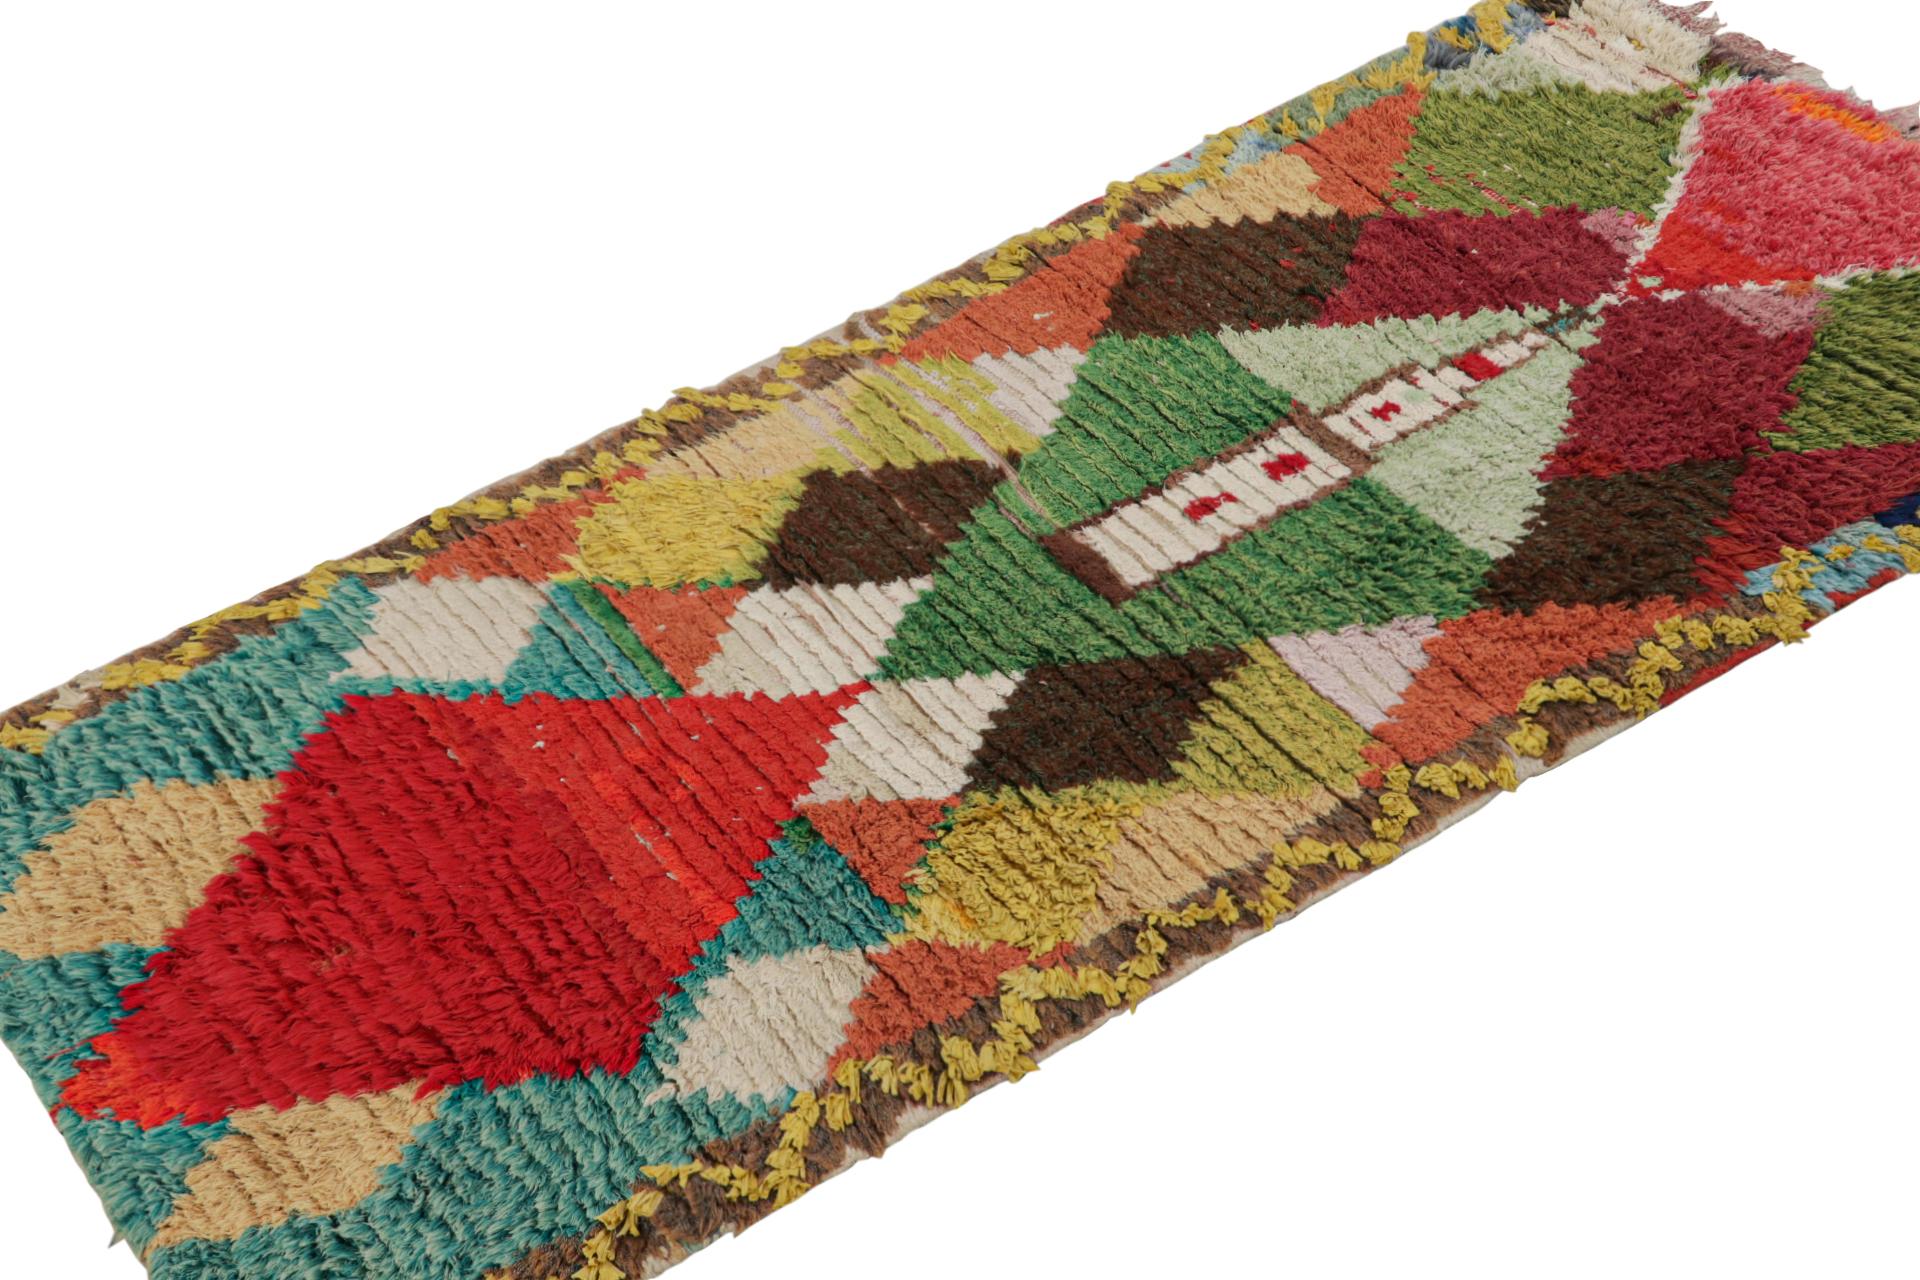 Hand-knotted in wool circa 1940-1950, this 3x6 vintage Moroccan runner is believed to hail from the Azilal tribe. 

On the Design:

This piece enjoys whimsical tones of red blue, green and brown in lozenges and other primitivist Berber geometric